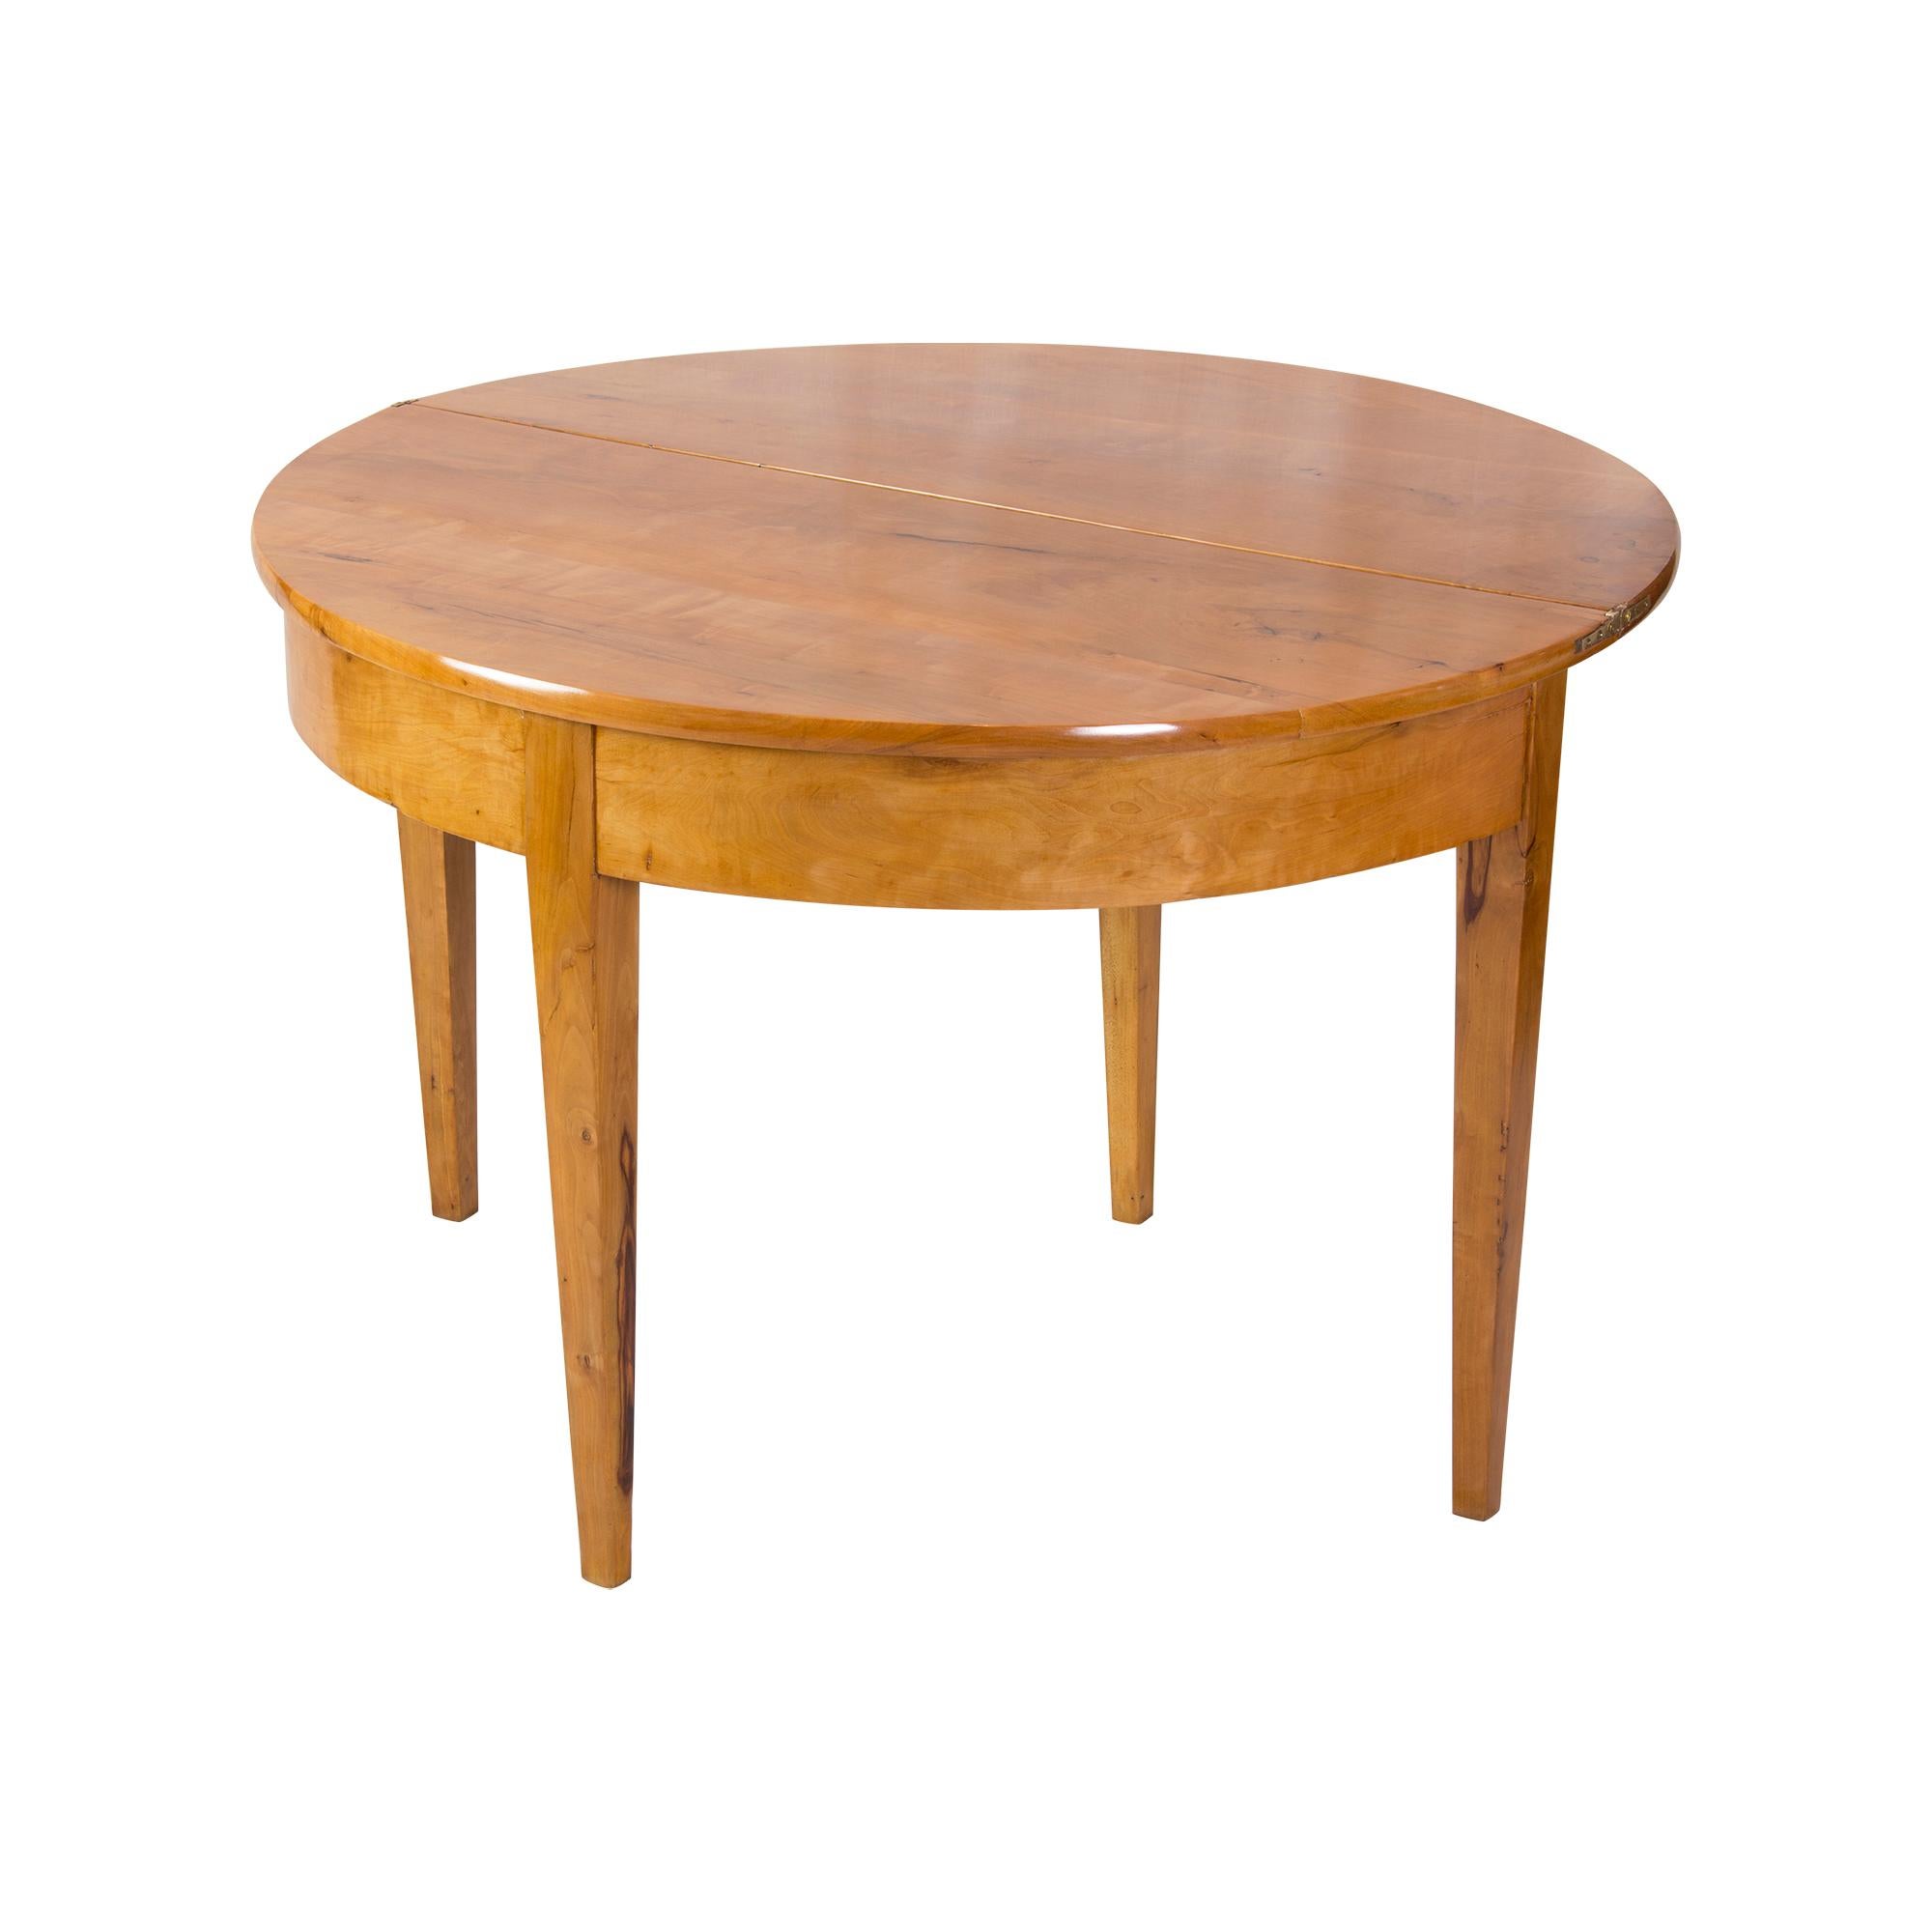 Beautiful Demi Lune table can be placed against the wall as a console semicircular. Or folded up in the middle of the room as a round table. The table is made of plum wood. The wood has a beautiful wood colour, similar to cherry. The legs are square